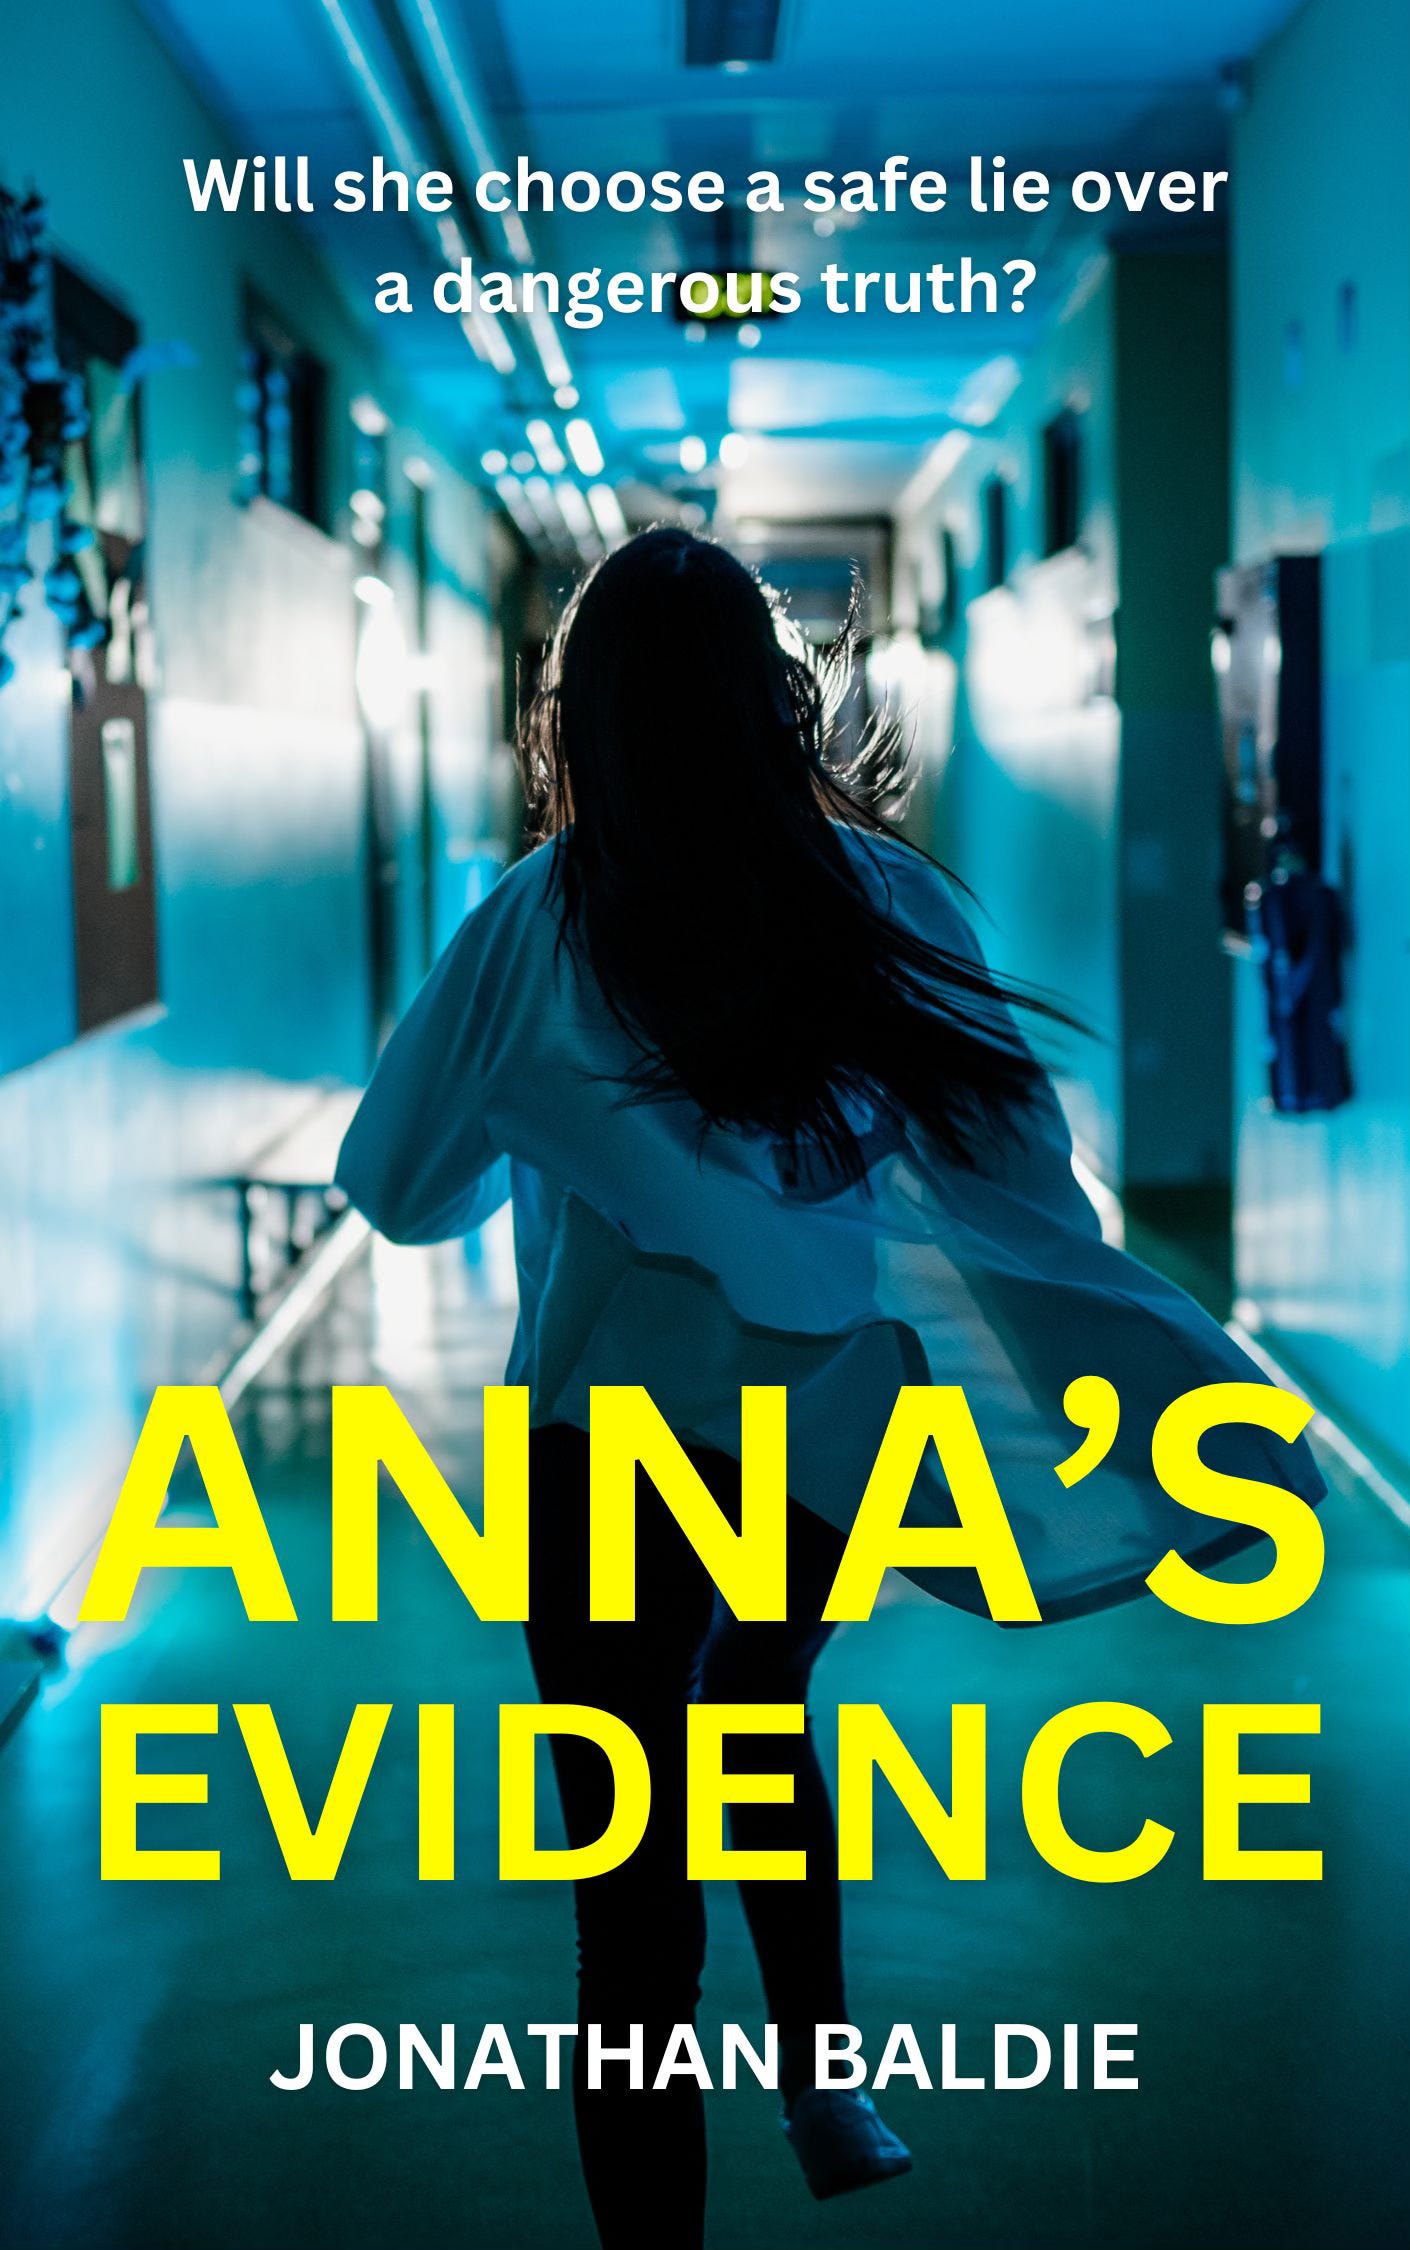 Cover for "Anna's Evidence" by Jonathan Baldie. Pictures a young woman running down a corridor. 